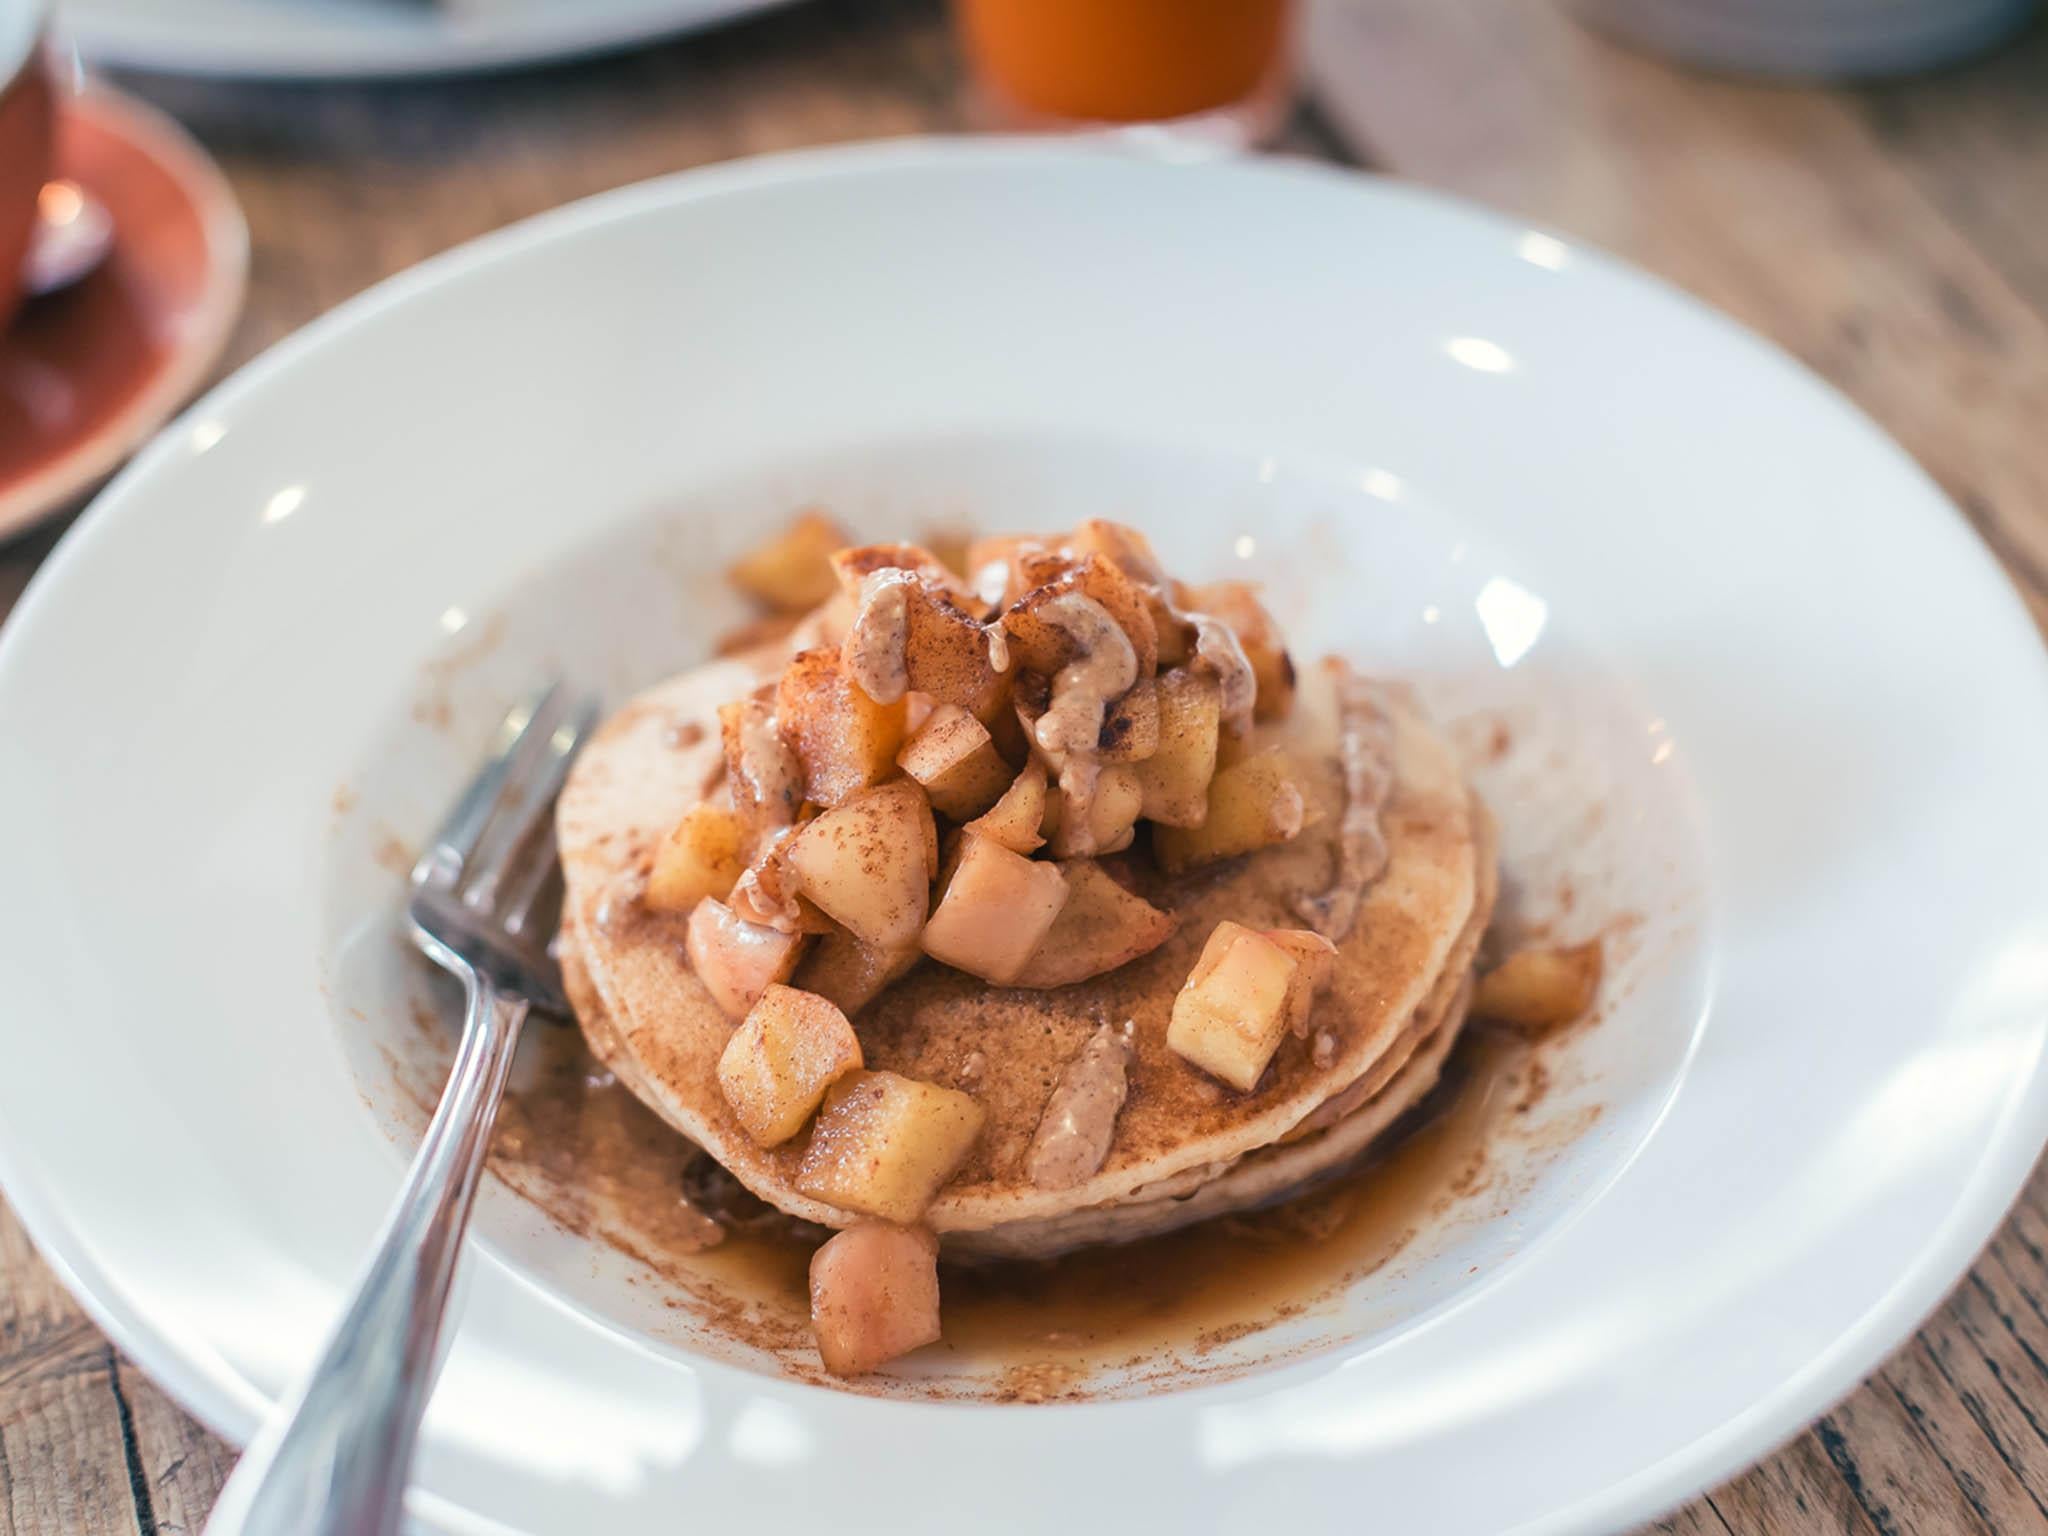 The pancakes are fluffy – something that is normally hard to achieve in vegan cooking